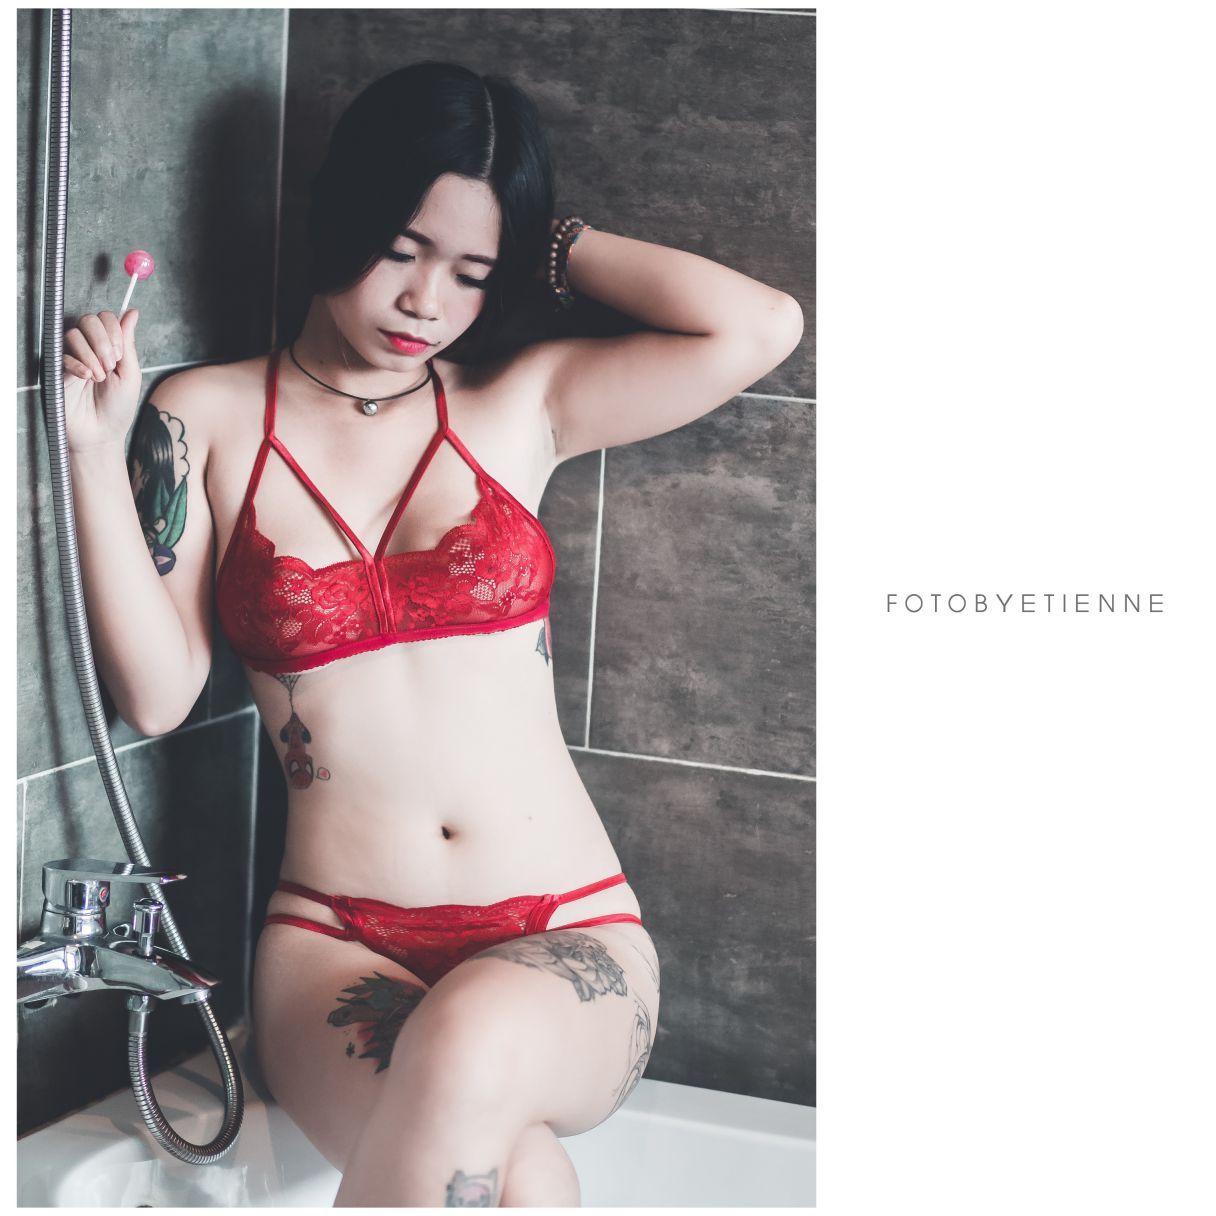 Super hot photos of Vietnamese beauties with lingerie and bikini - Photo by Le Blanc Studio - Part 3 - Picture 31